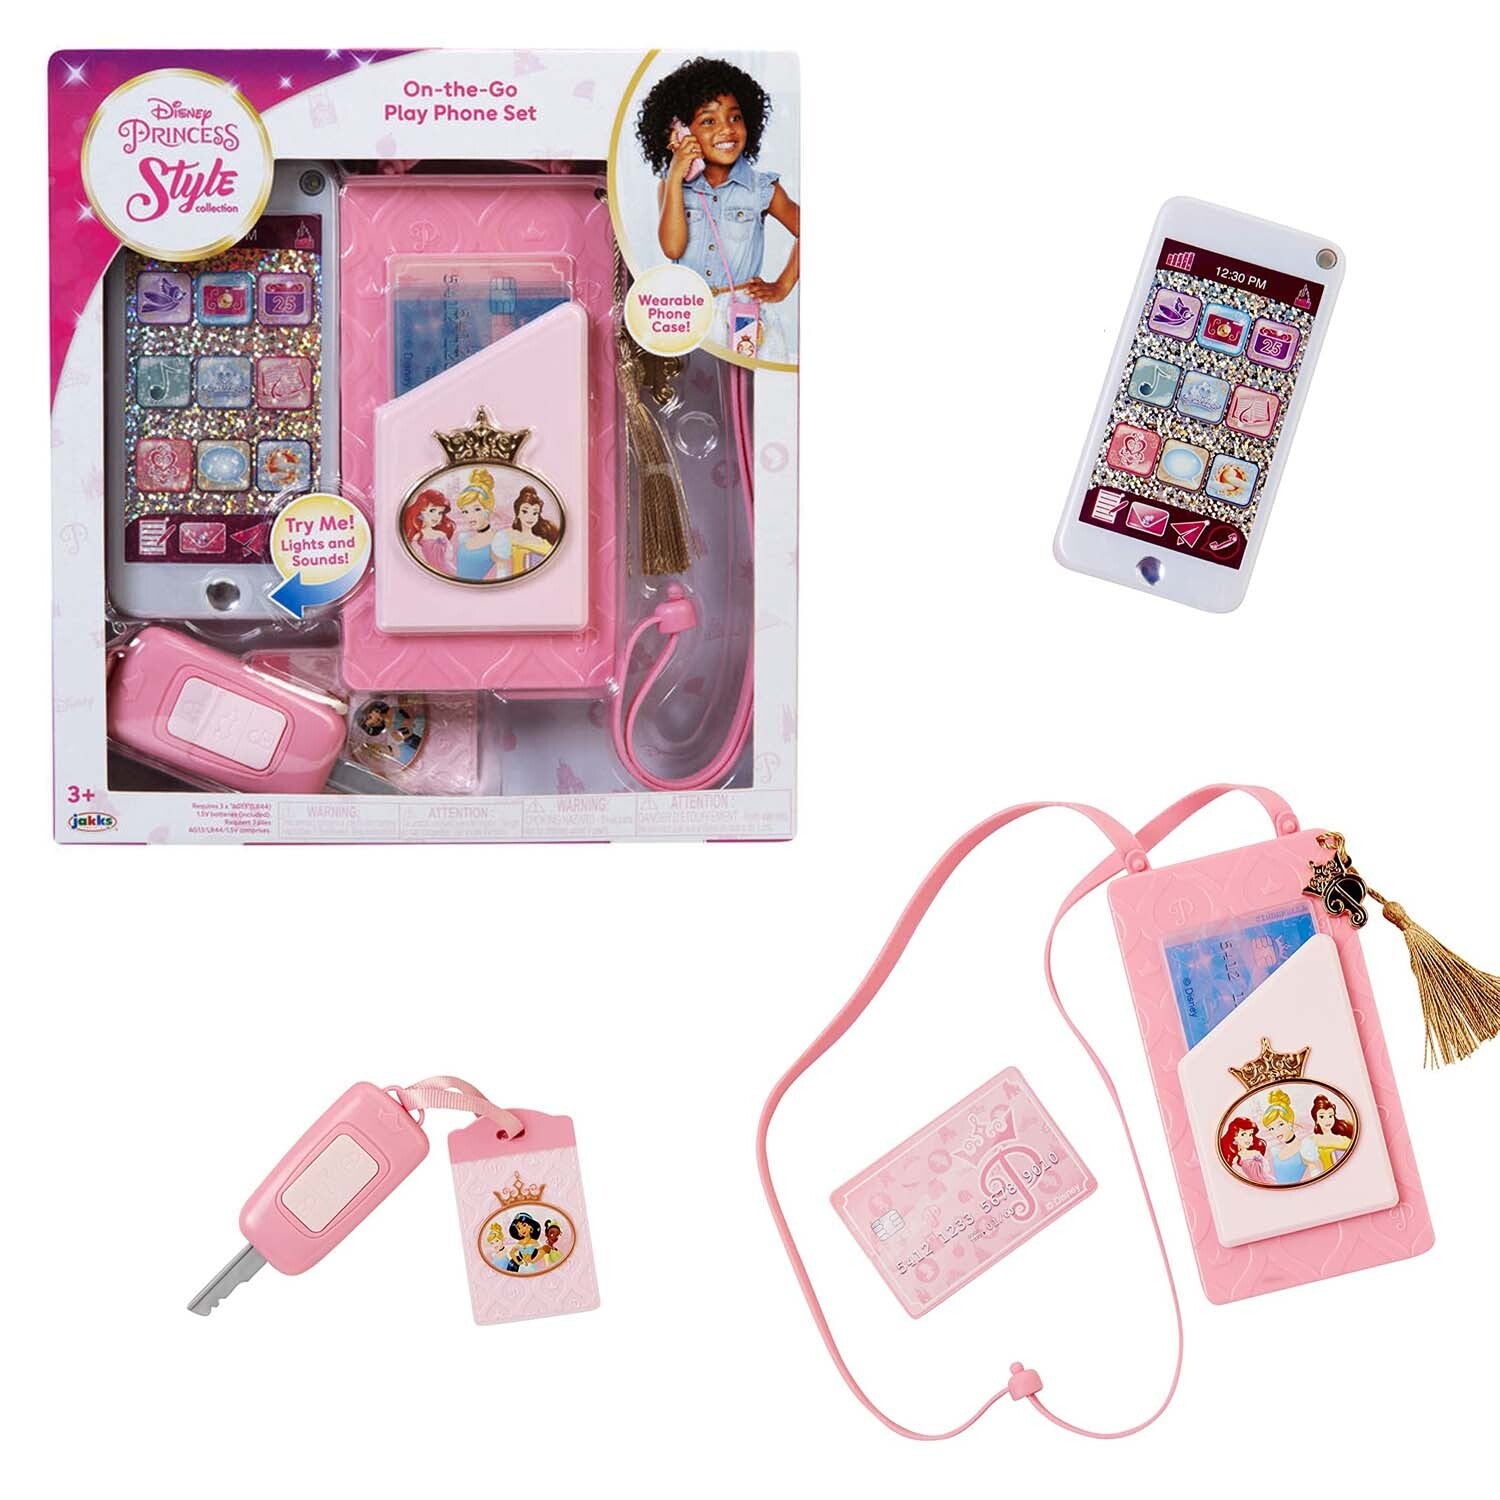 Disney Princess Style Collection - On The Go Play Phone Set